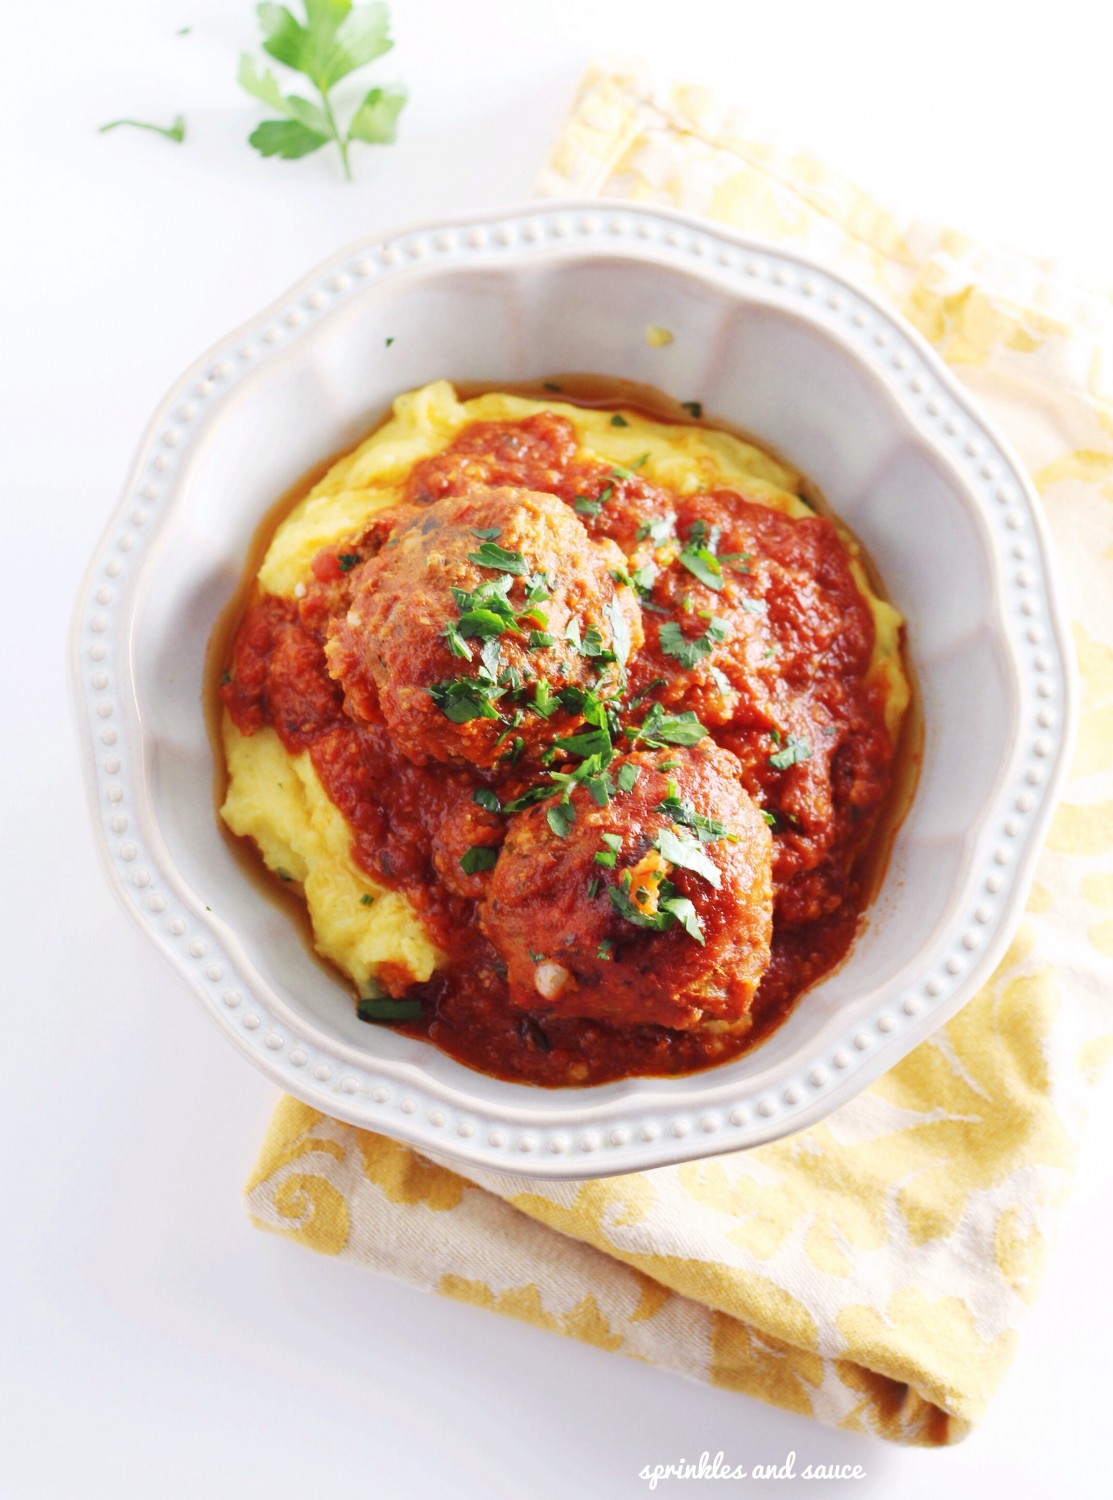 Pork and Veal Meatballs To